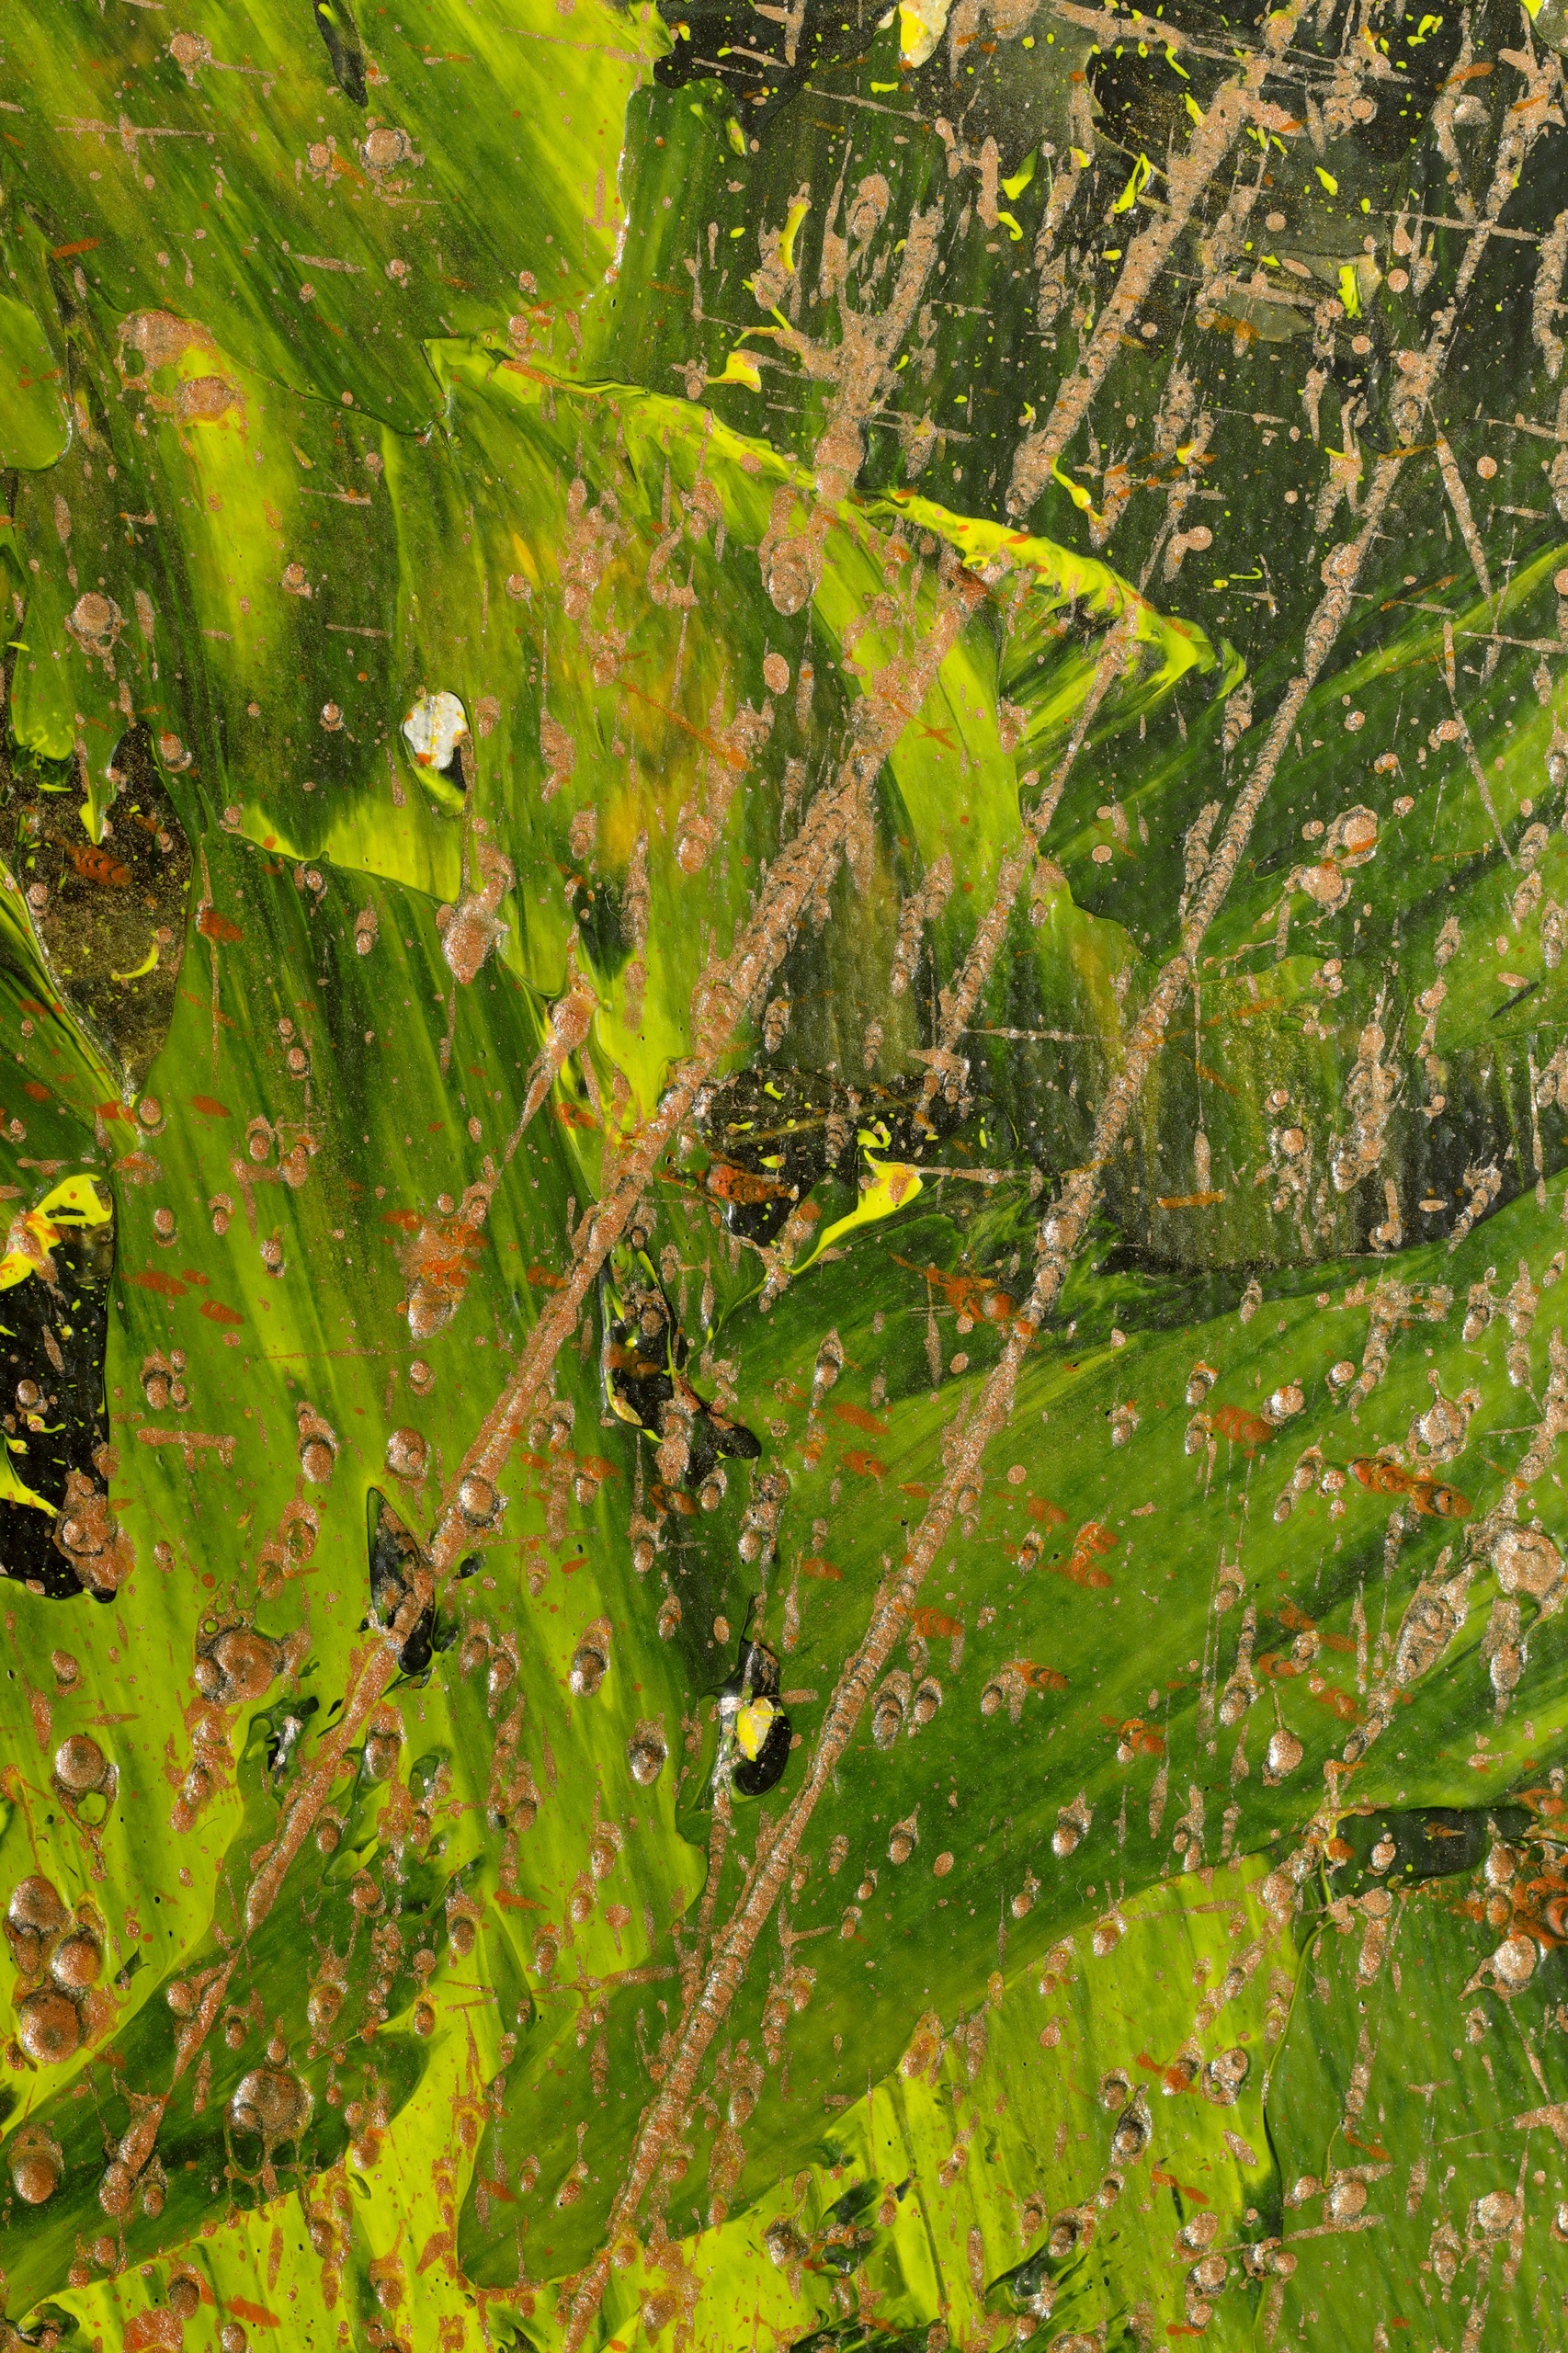 DETAIL - Fast Nature (Among bees) | 36 x 36 inches | Nestor Toro